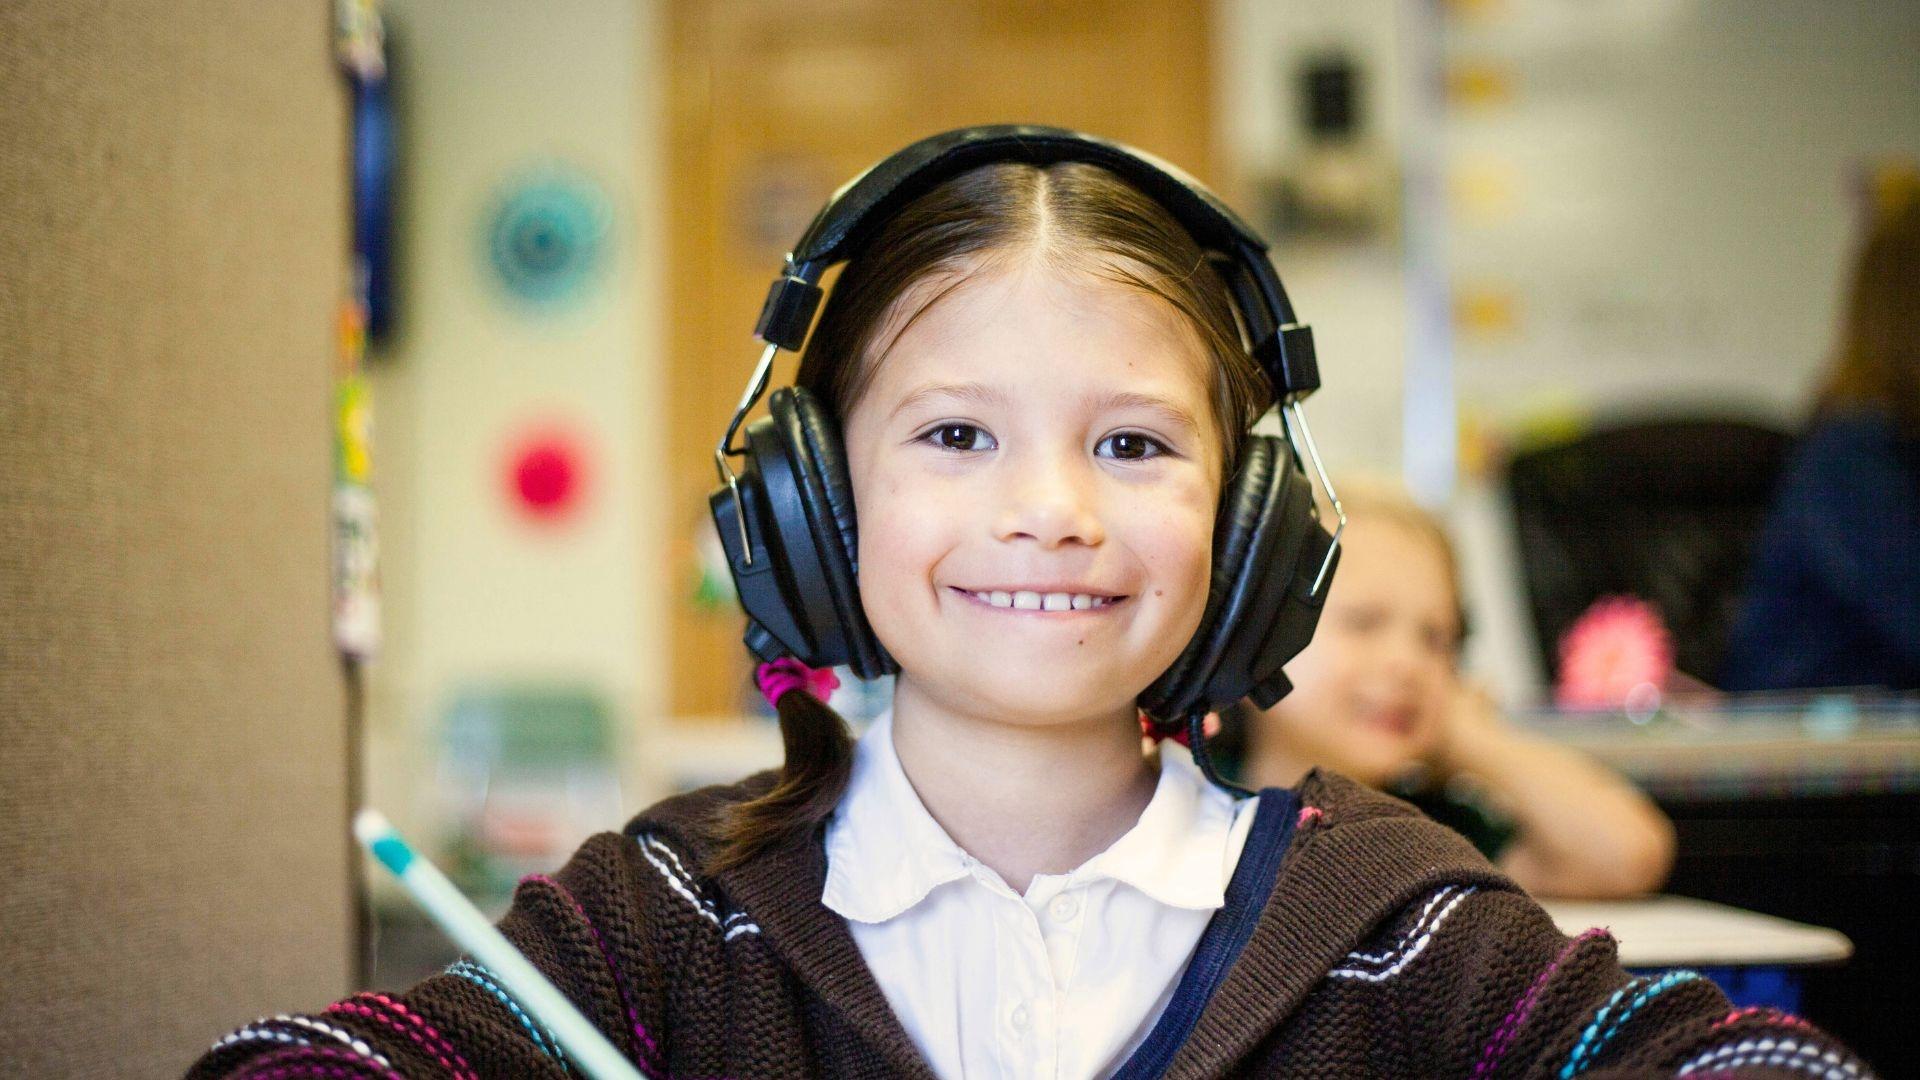 A child smiles with headphones on.